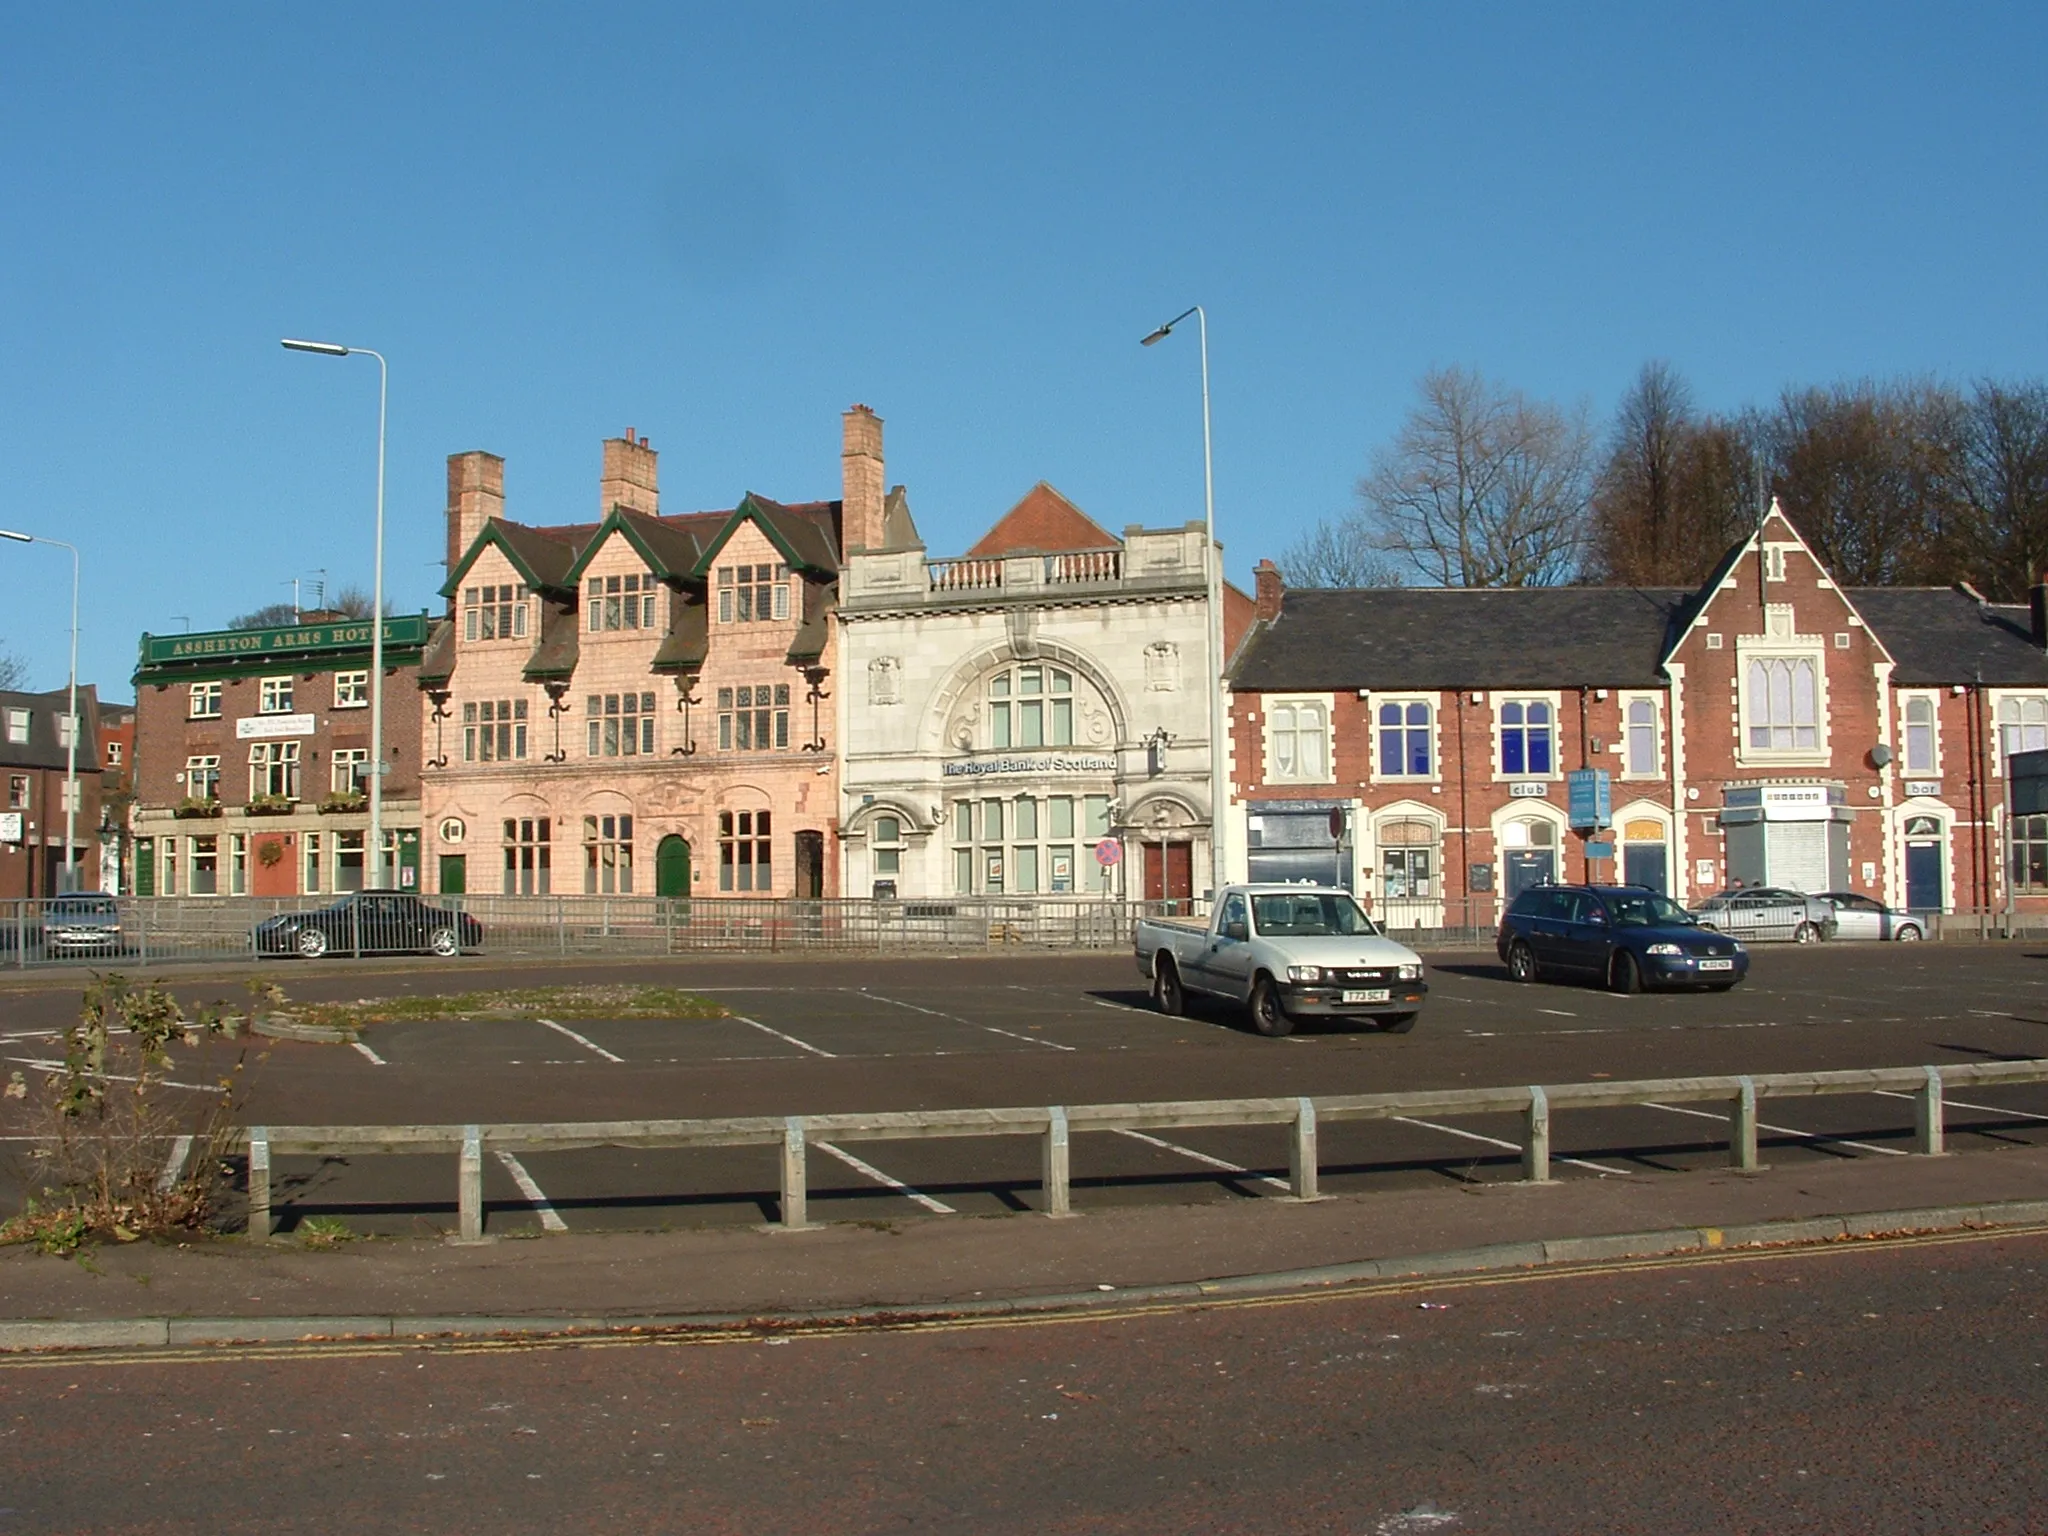 Photo showing: A row of buildings in Middleton, Greater Manchester, England. Second building from the left is by Edgar Wood, a prominent local architect.

On the left is the Assheton Arms Pub. On the right the Royal Bank of Scotland and far right is an Italian Restaurant which for a long time was known as Jacques Wine Bar.